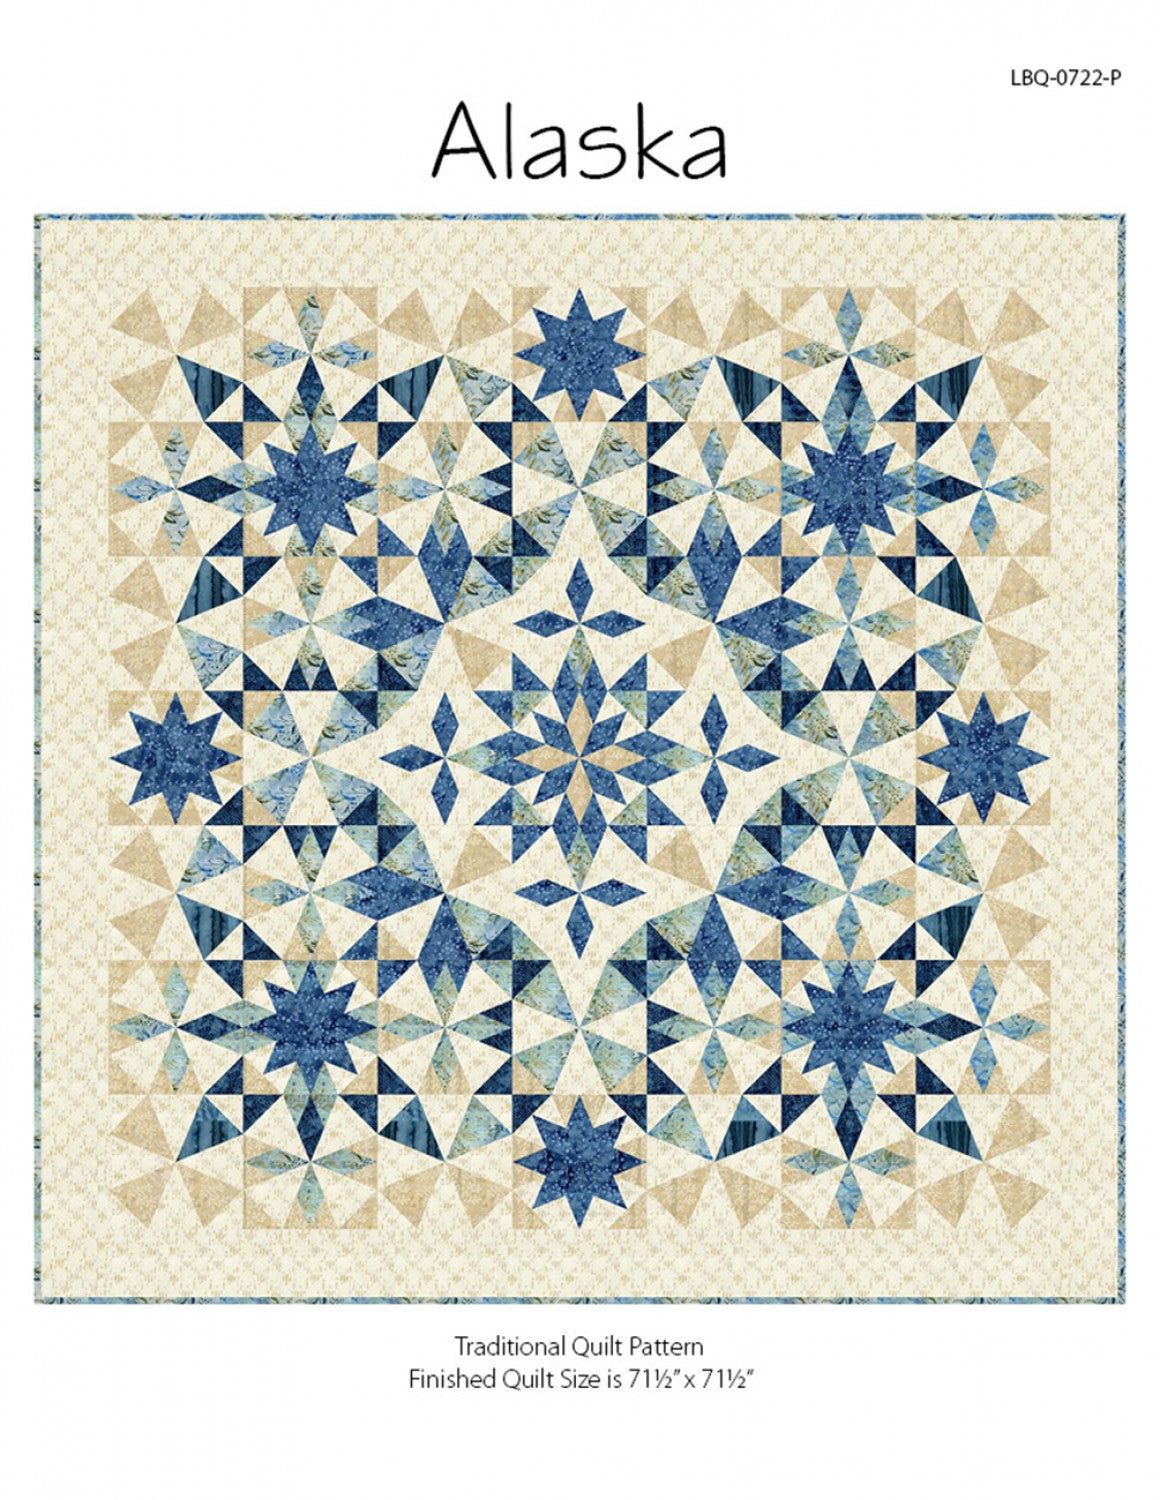 Alaska Quilt Pattern by Edyta Sitar of Laundry Basket Quilts